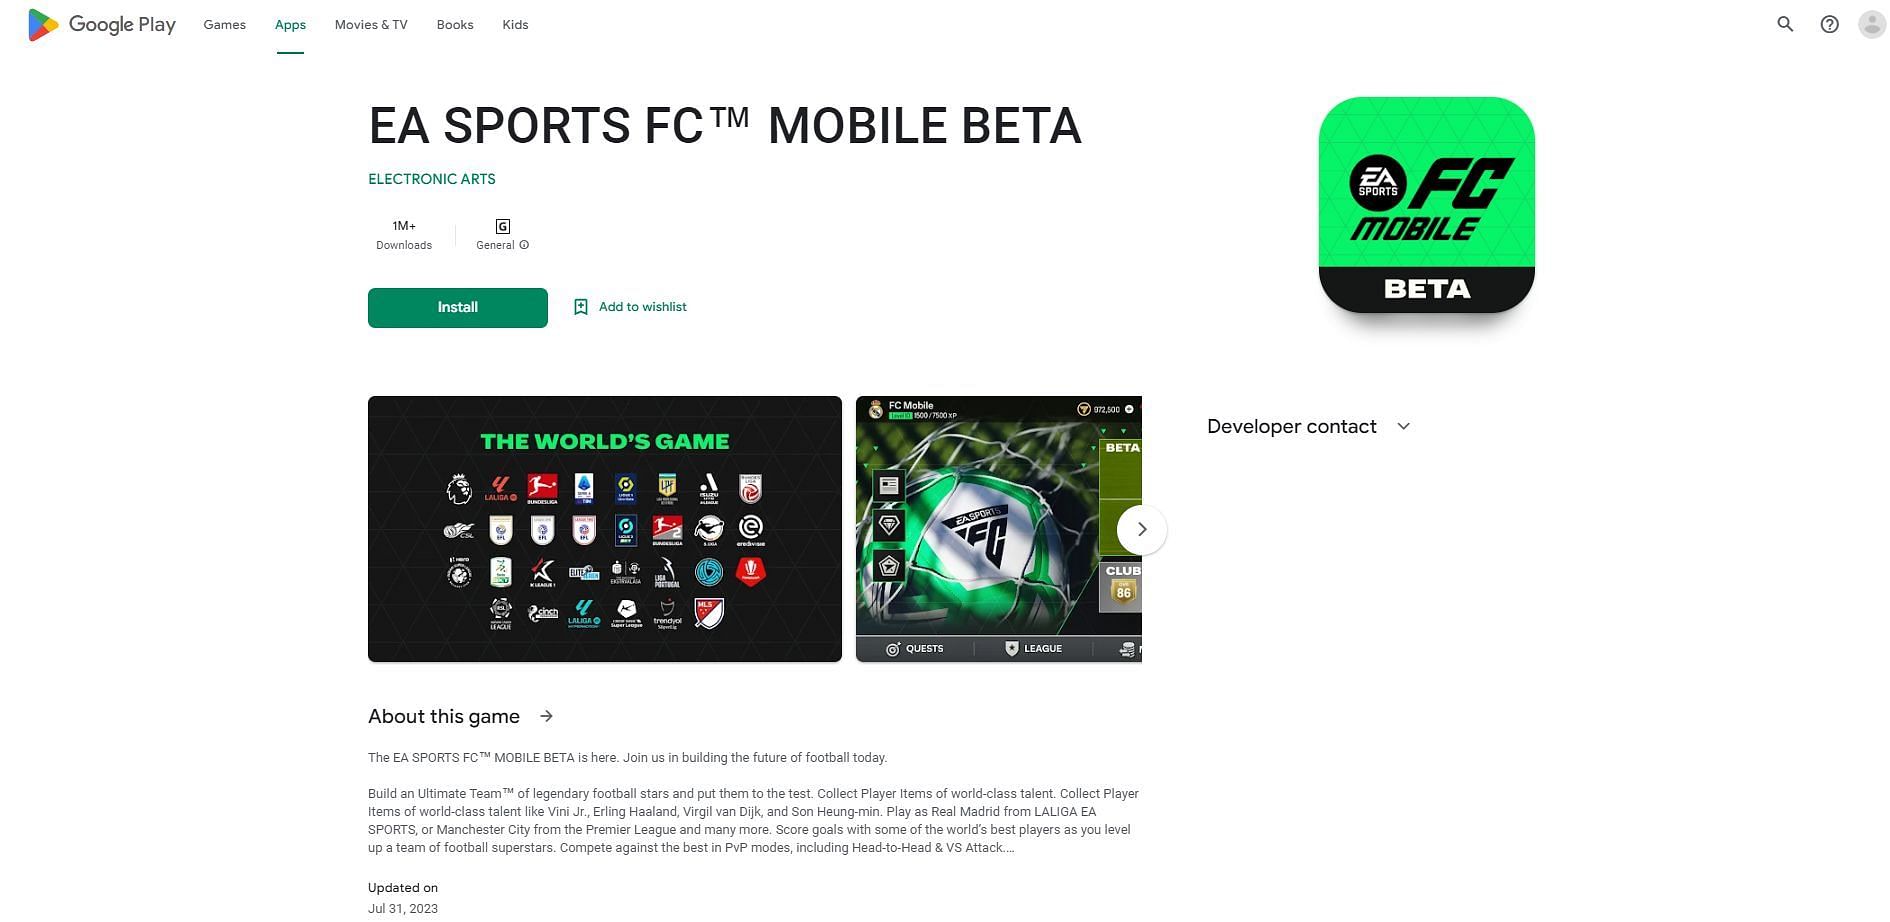 EA SPORTS FC MOBILE - BETA GAMEPLAY (Android/iOS) 